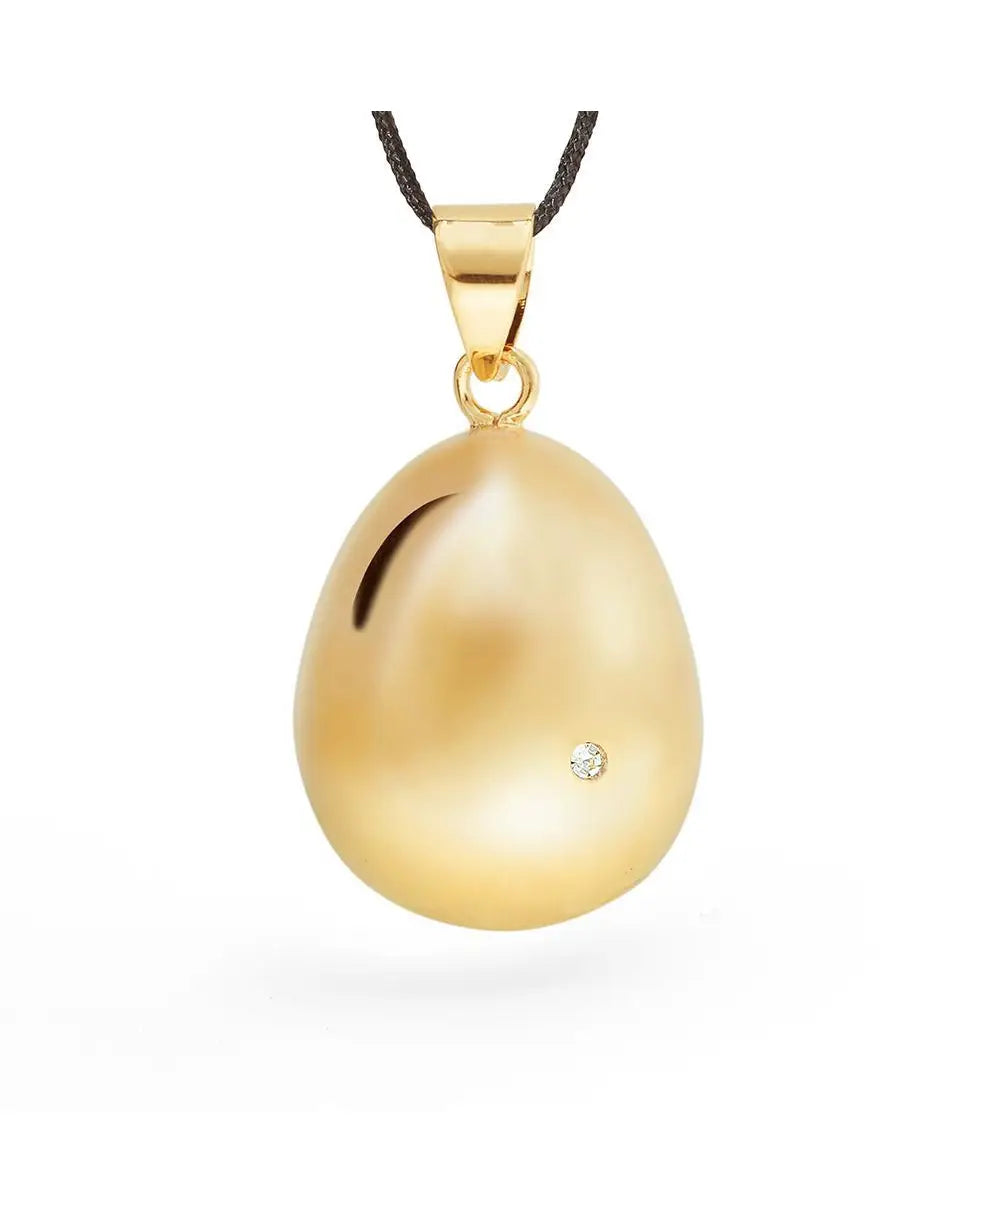 Mom-to-be necklace - Egg - Gold plated - swarovski crystal